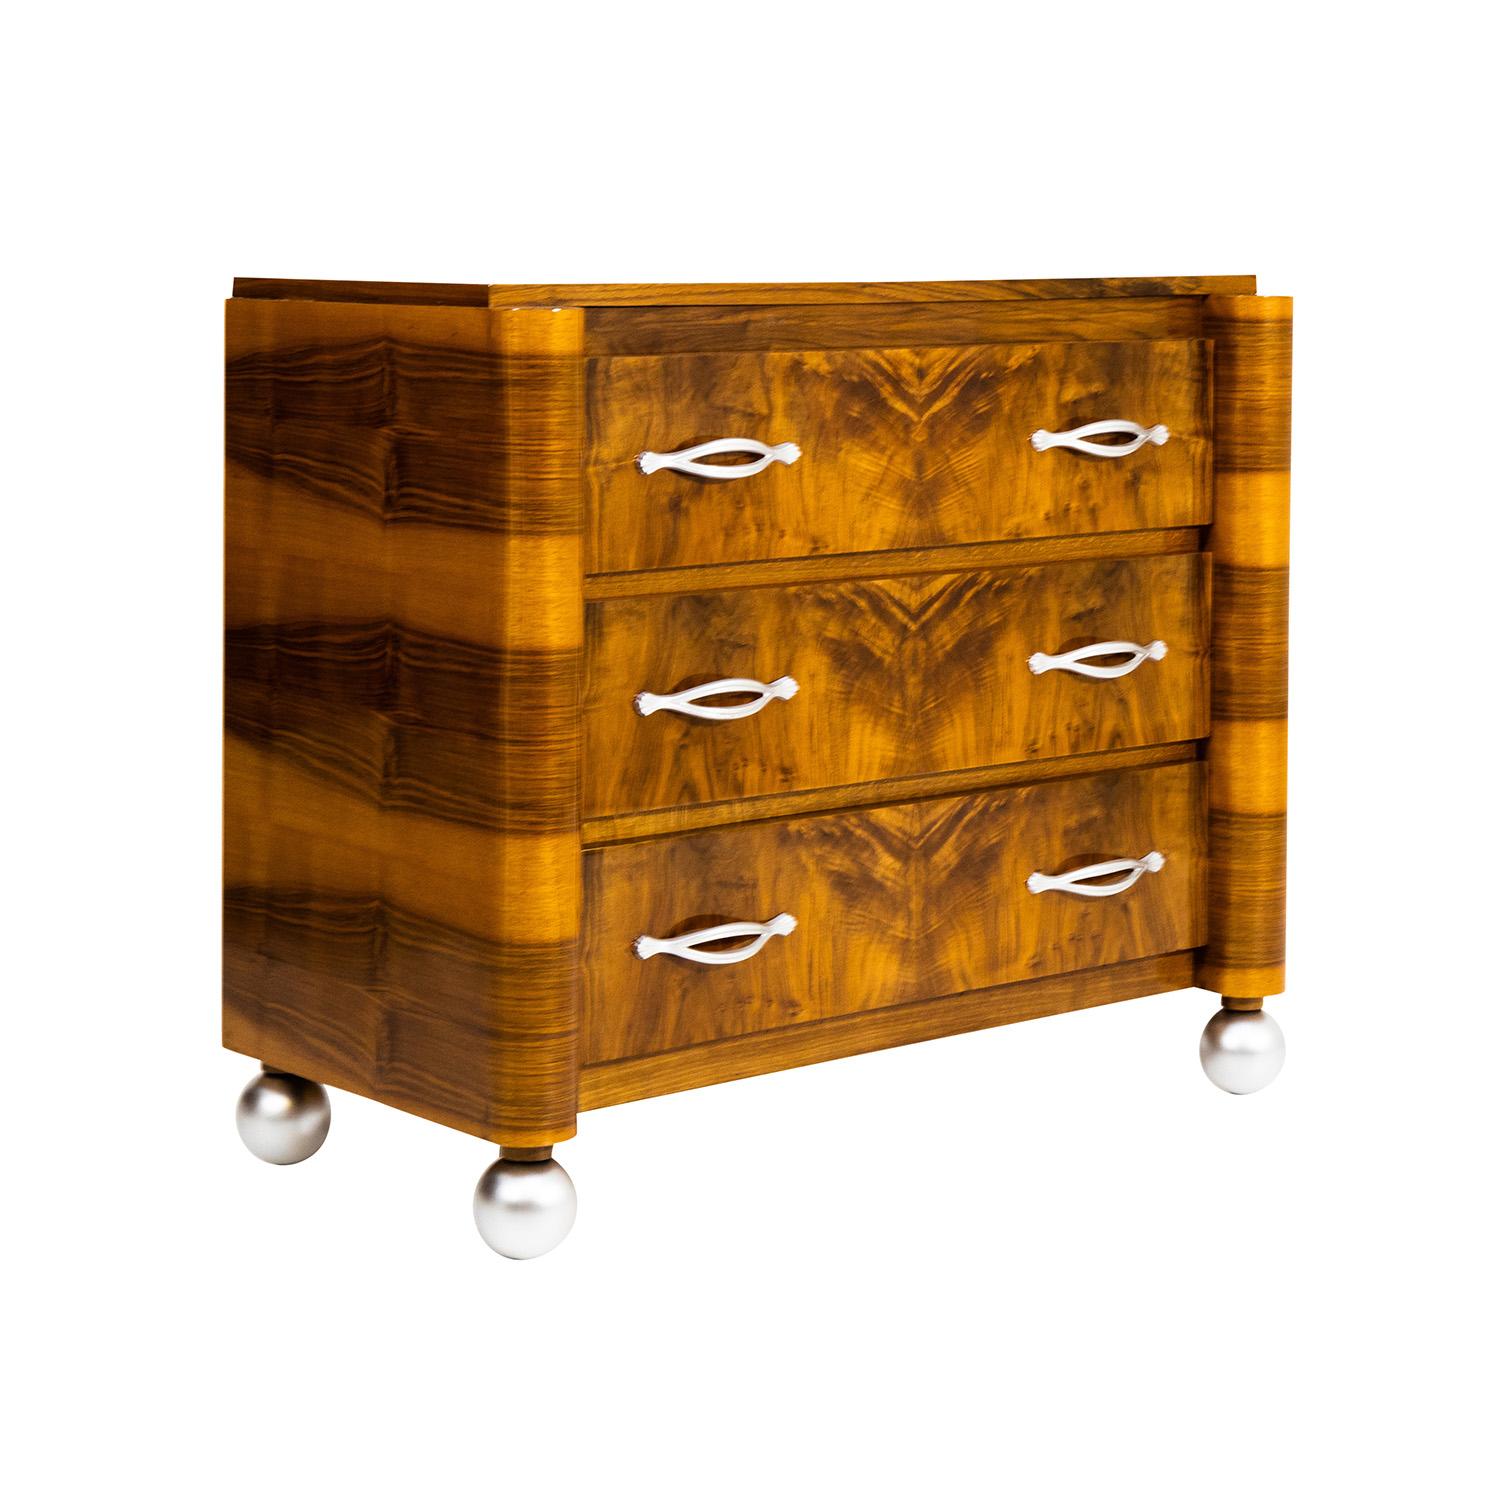 A dark-brown, vintage Art Deco commode made of hand crafted polished veneered Walnut with three large drawers, in good condition. The chest of drawers is standing on four round, silver ball feet with rounded corners and silver handles, pulls. Wear